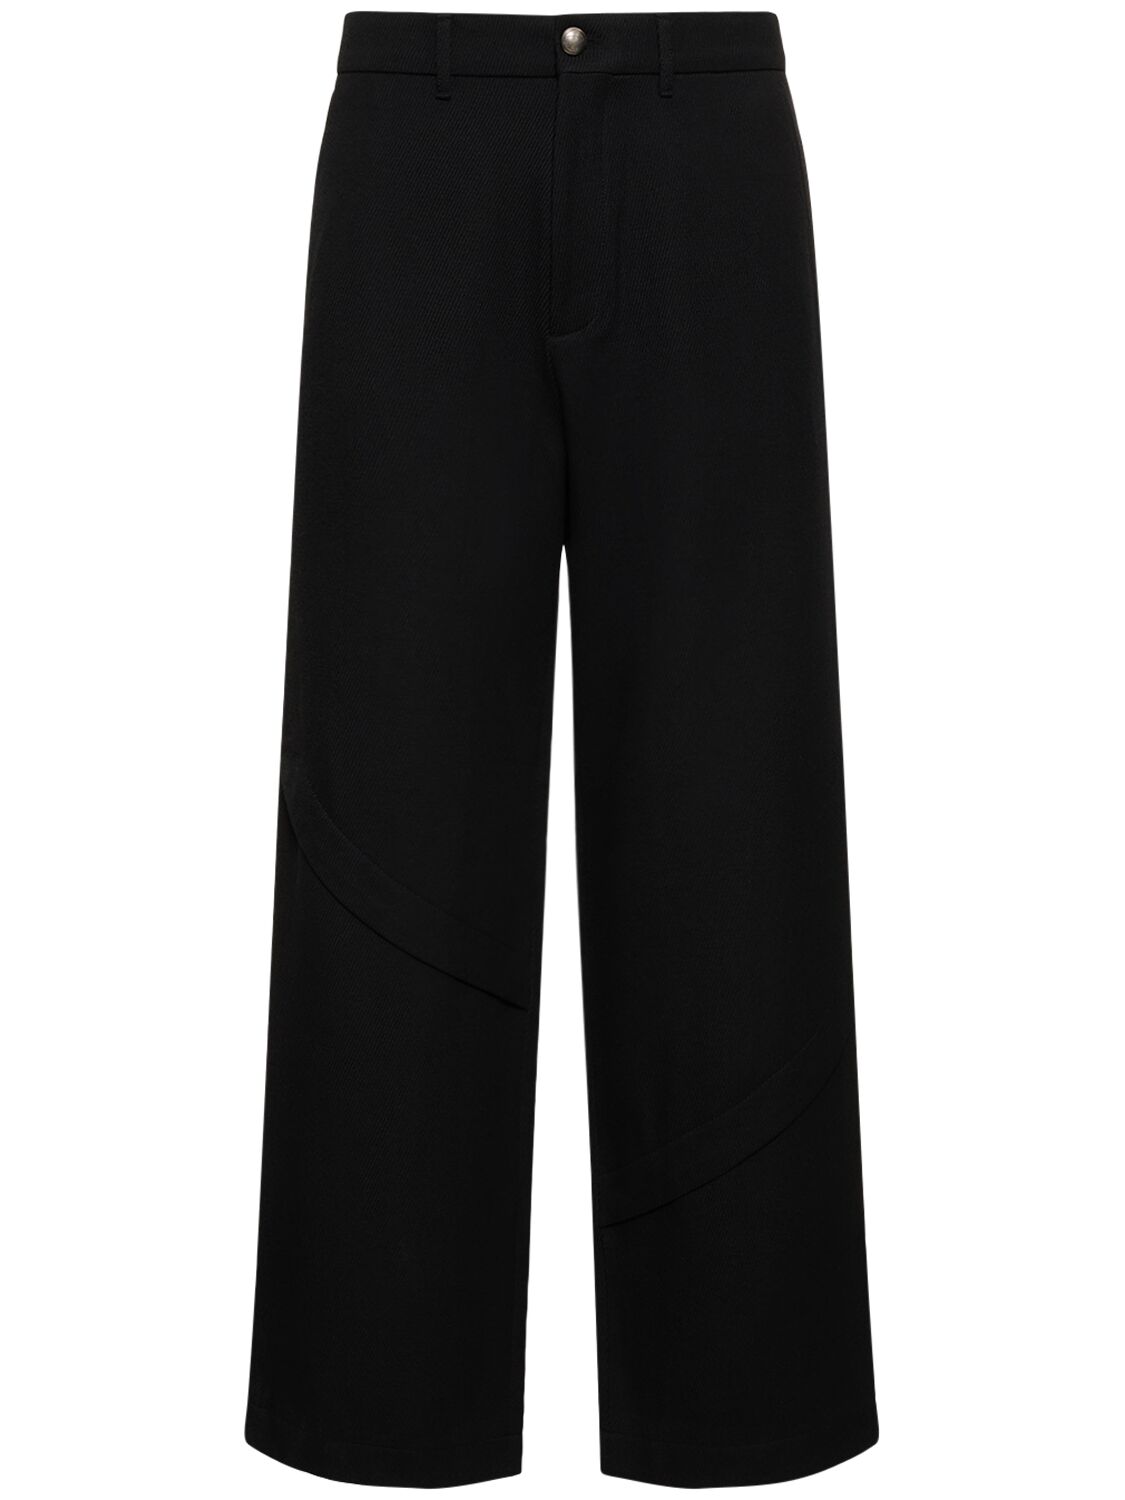 Image of Camtton Wool Twill Pants